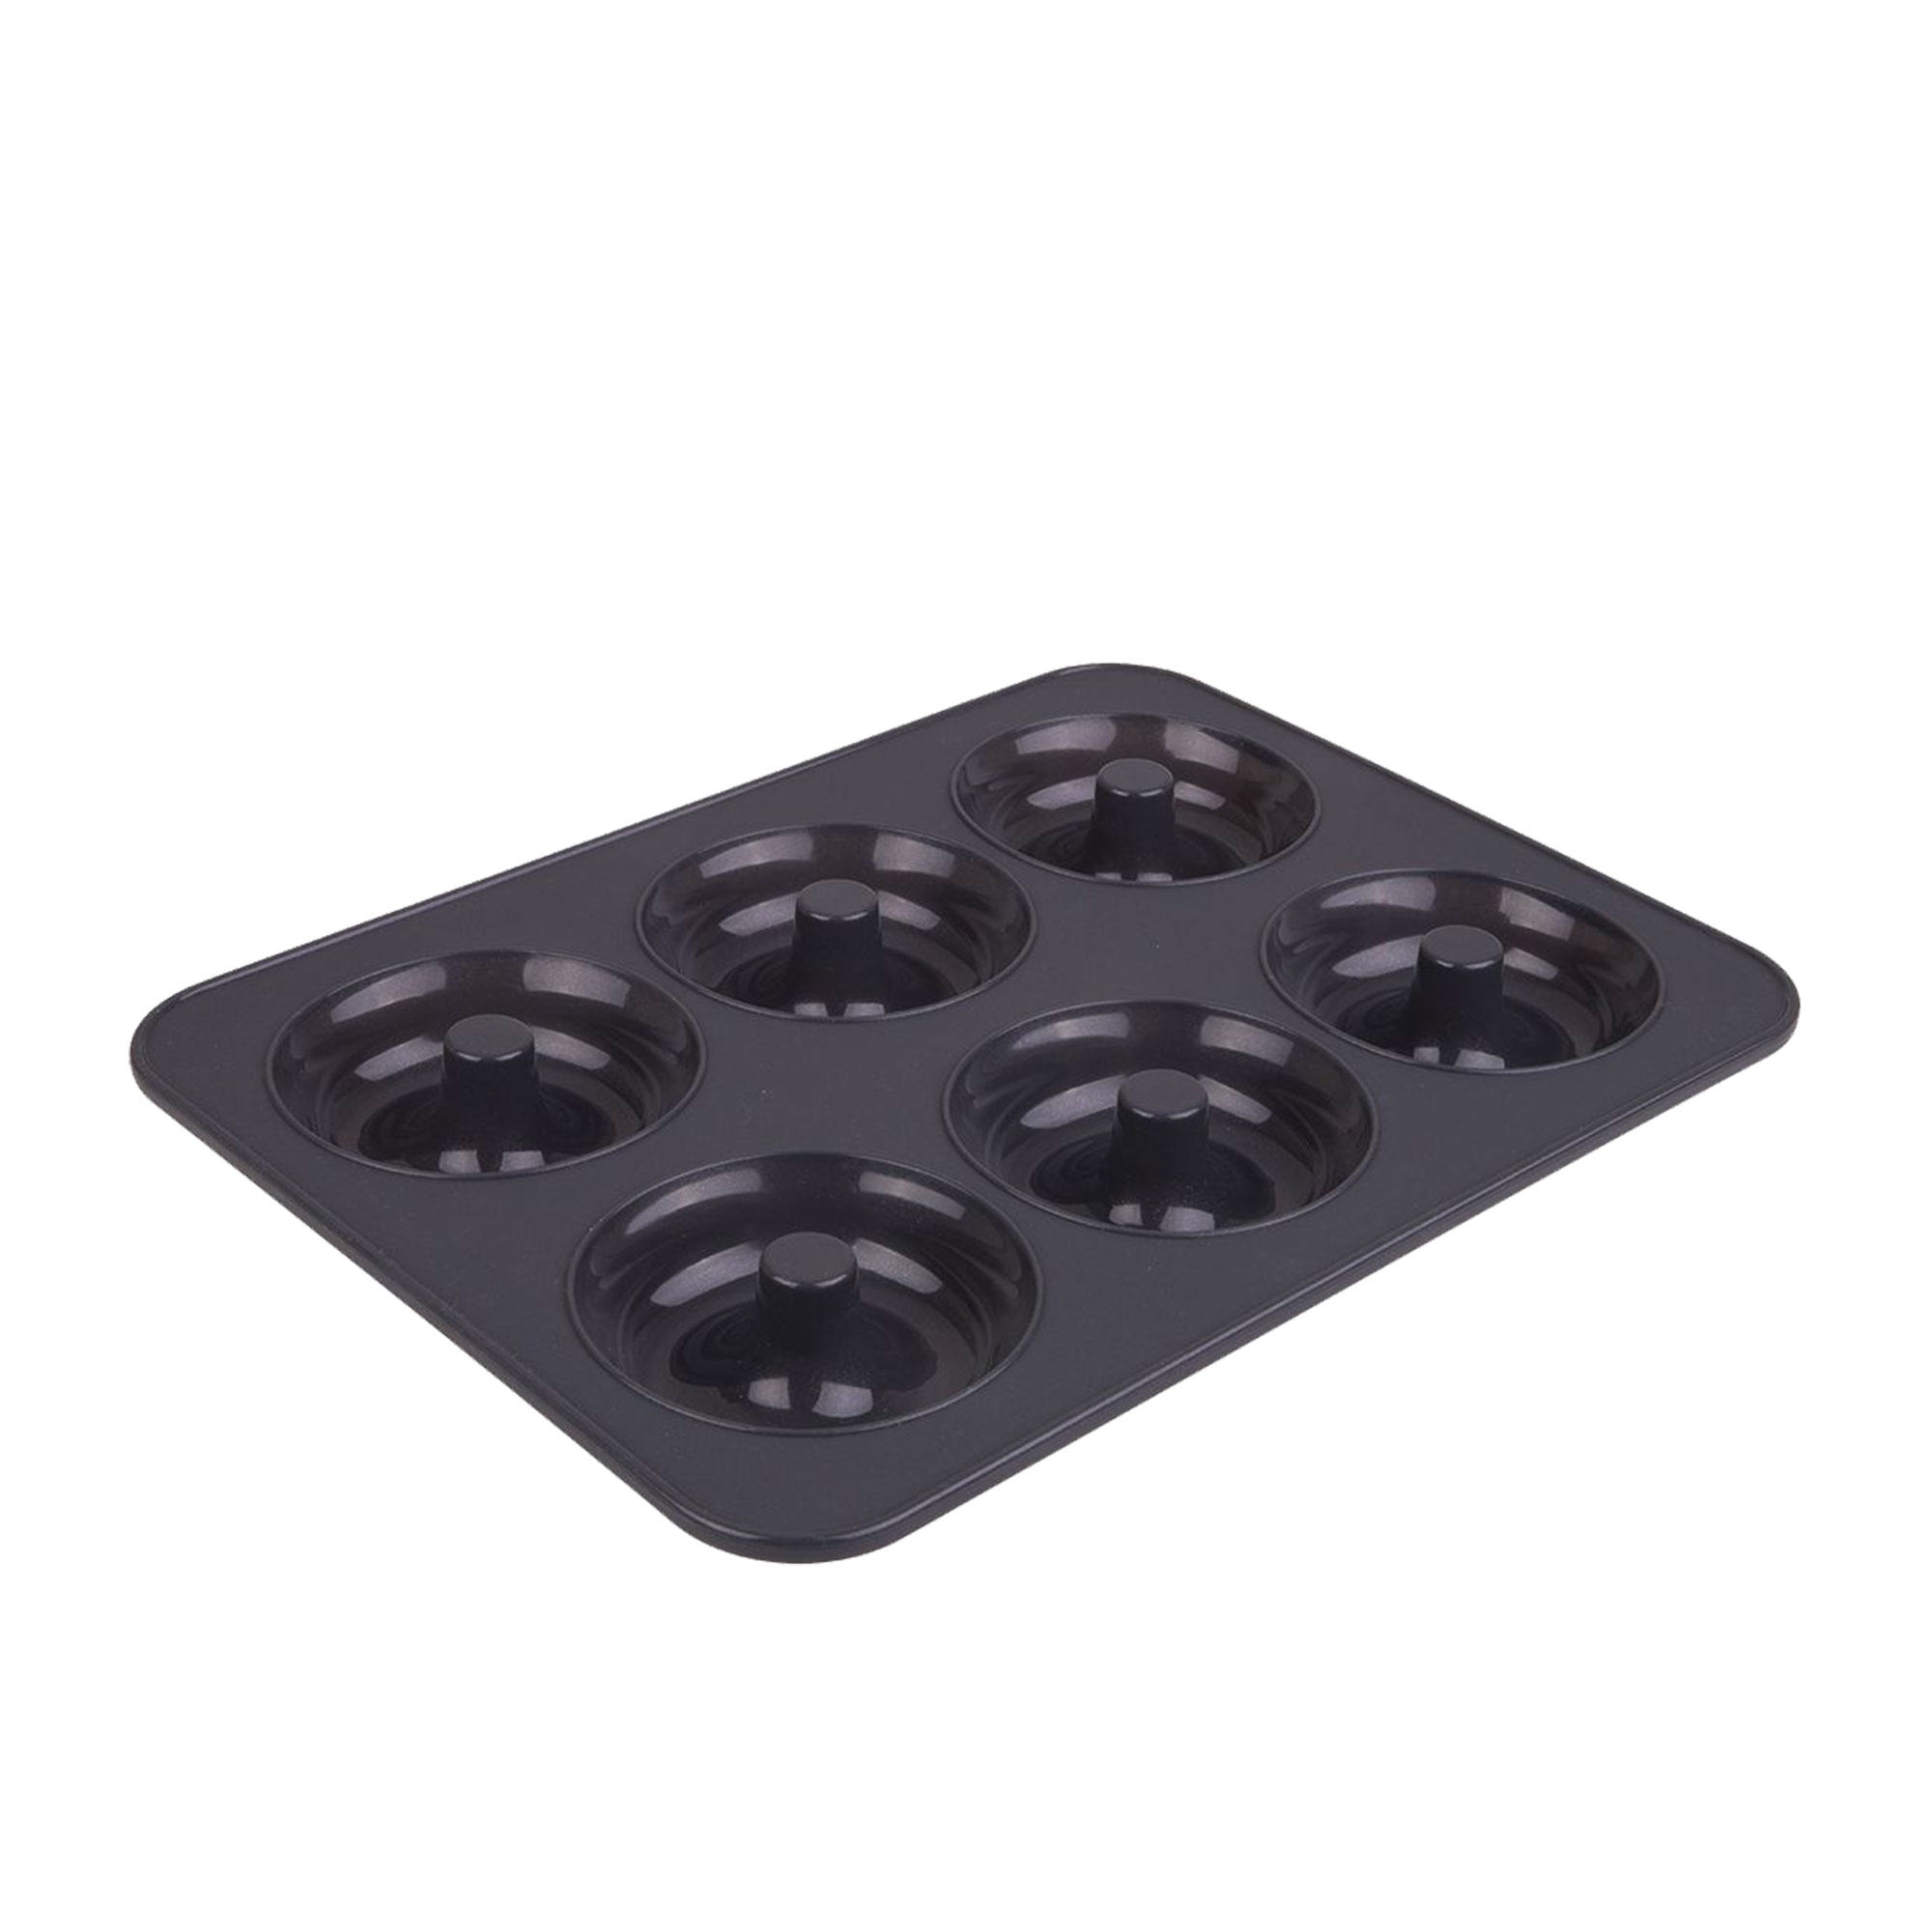 Daily Bake Silicone 6 Cup Doughnut Pan Charcoal Image 1